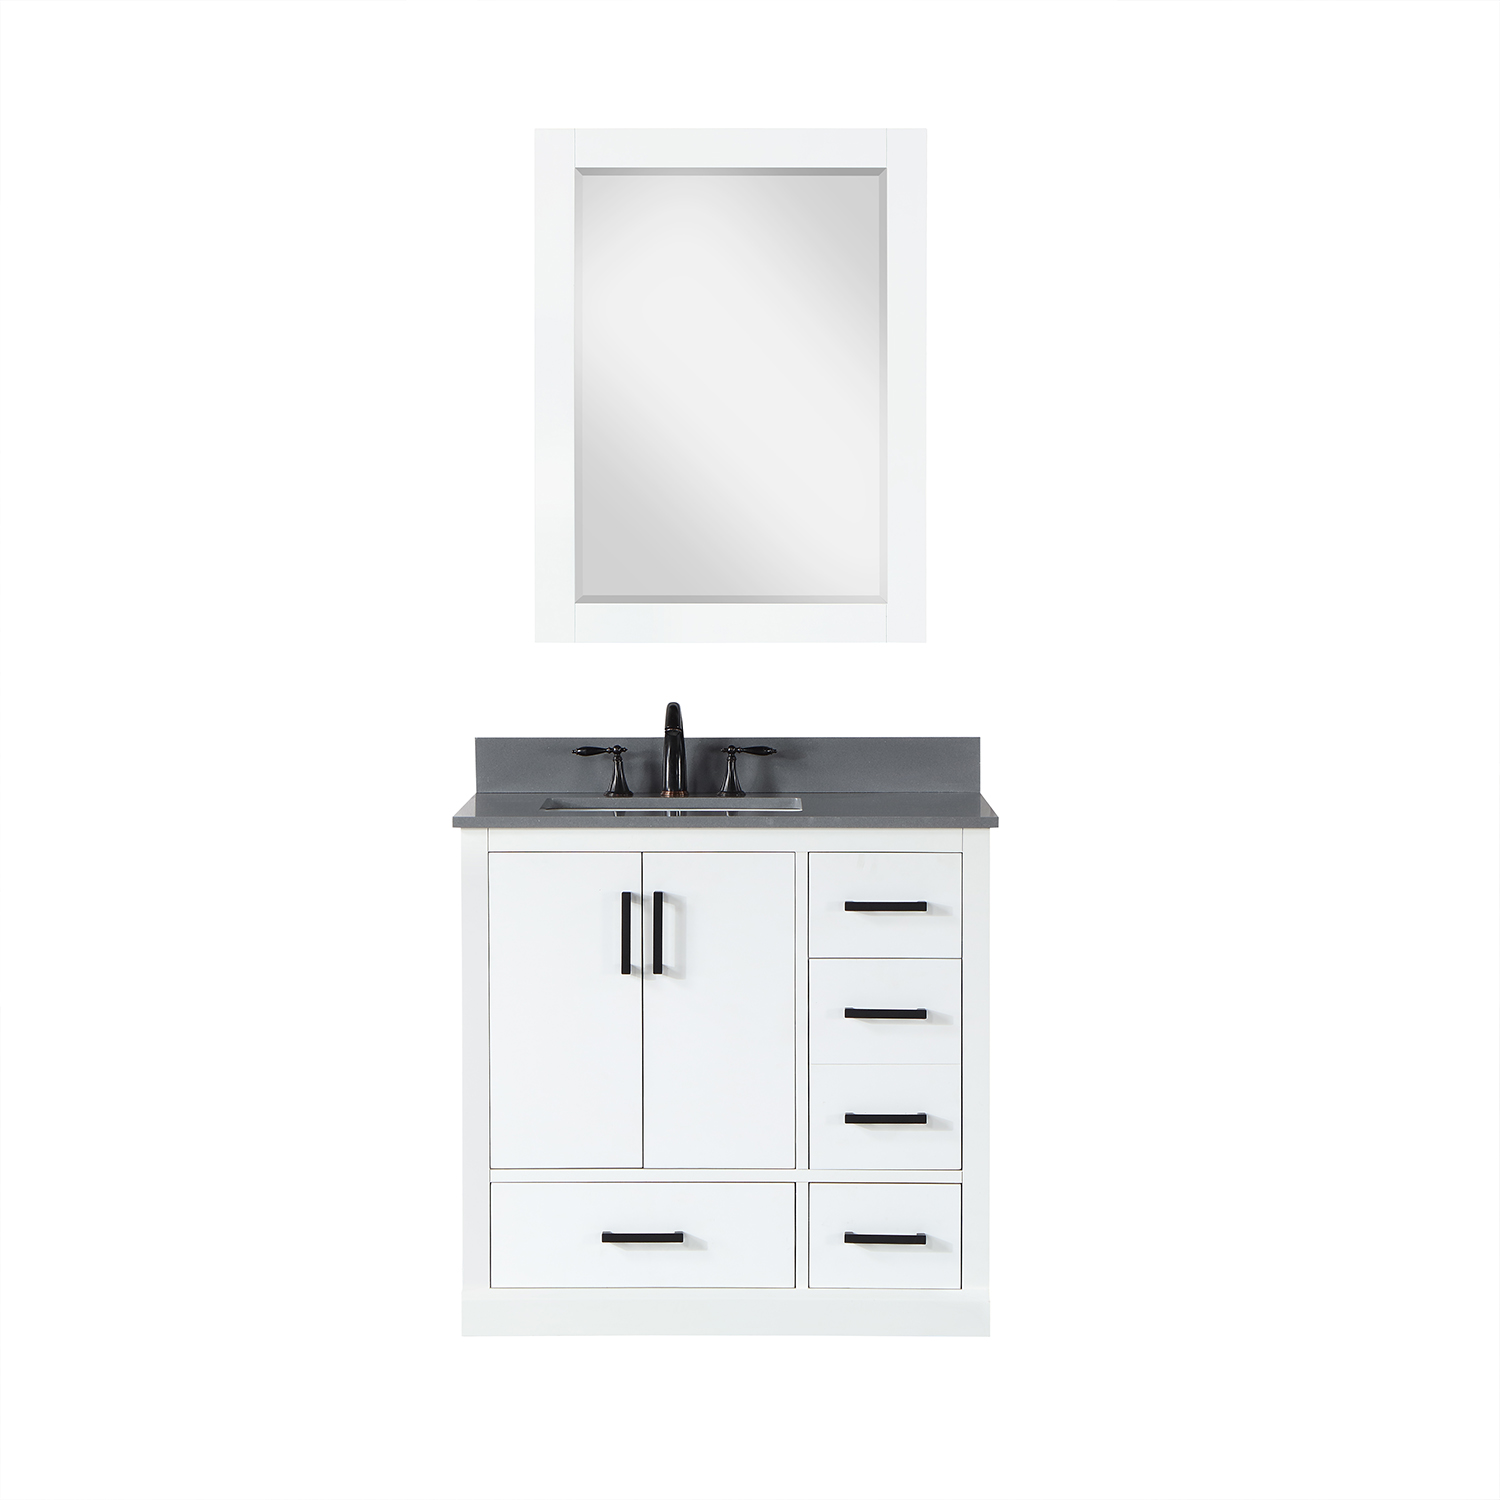 Issac Edwards Collection 36" Single Bathroom Vanity Set in White with Concrete Grey Composite Stone Countertop without Mirror 